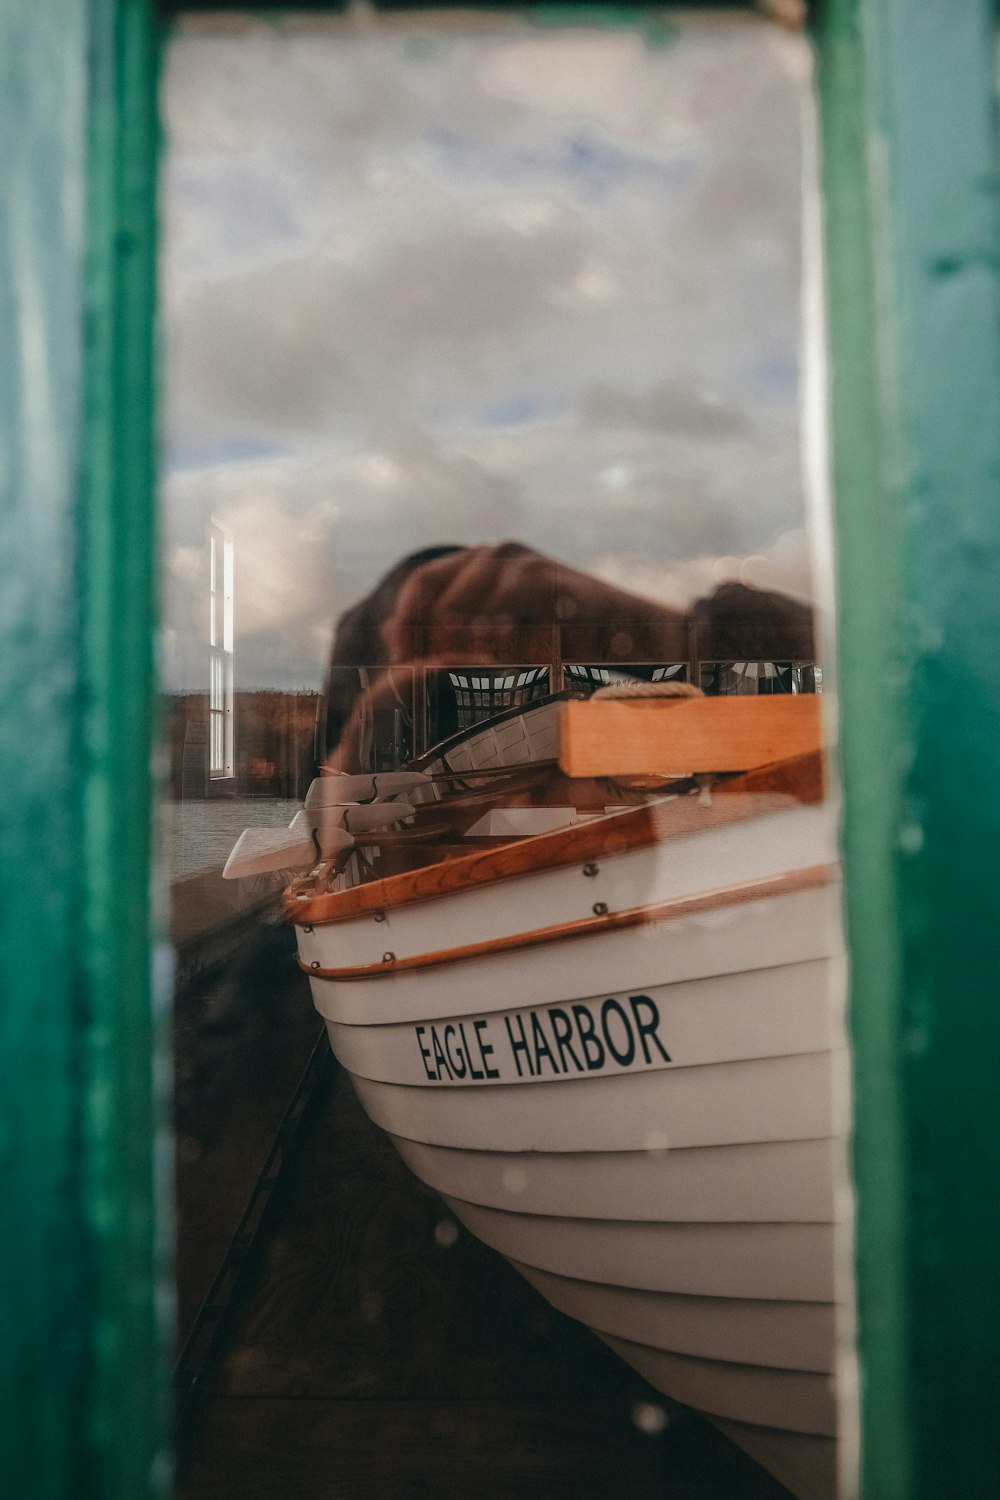 a reflection of a boat in a window